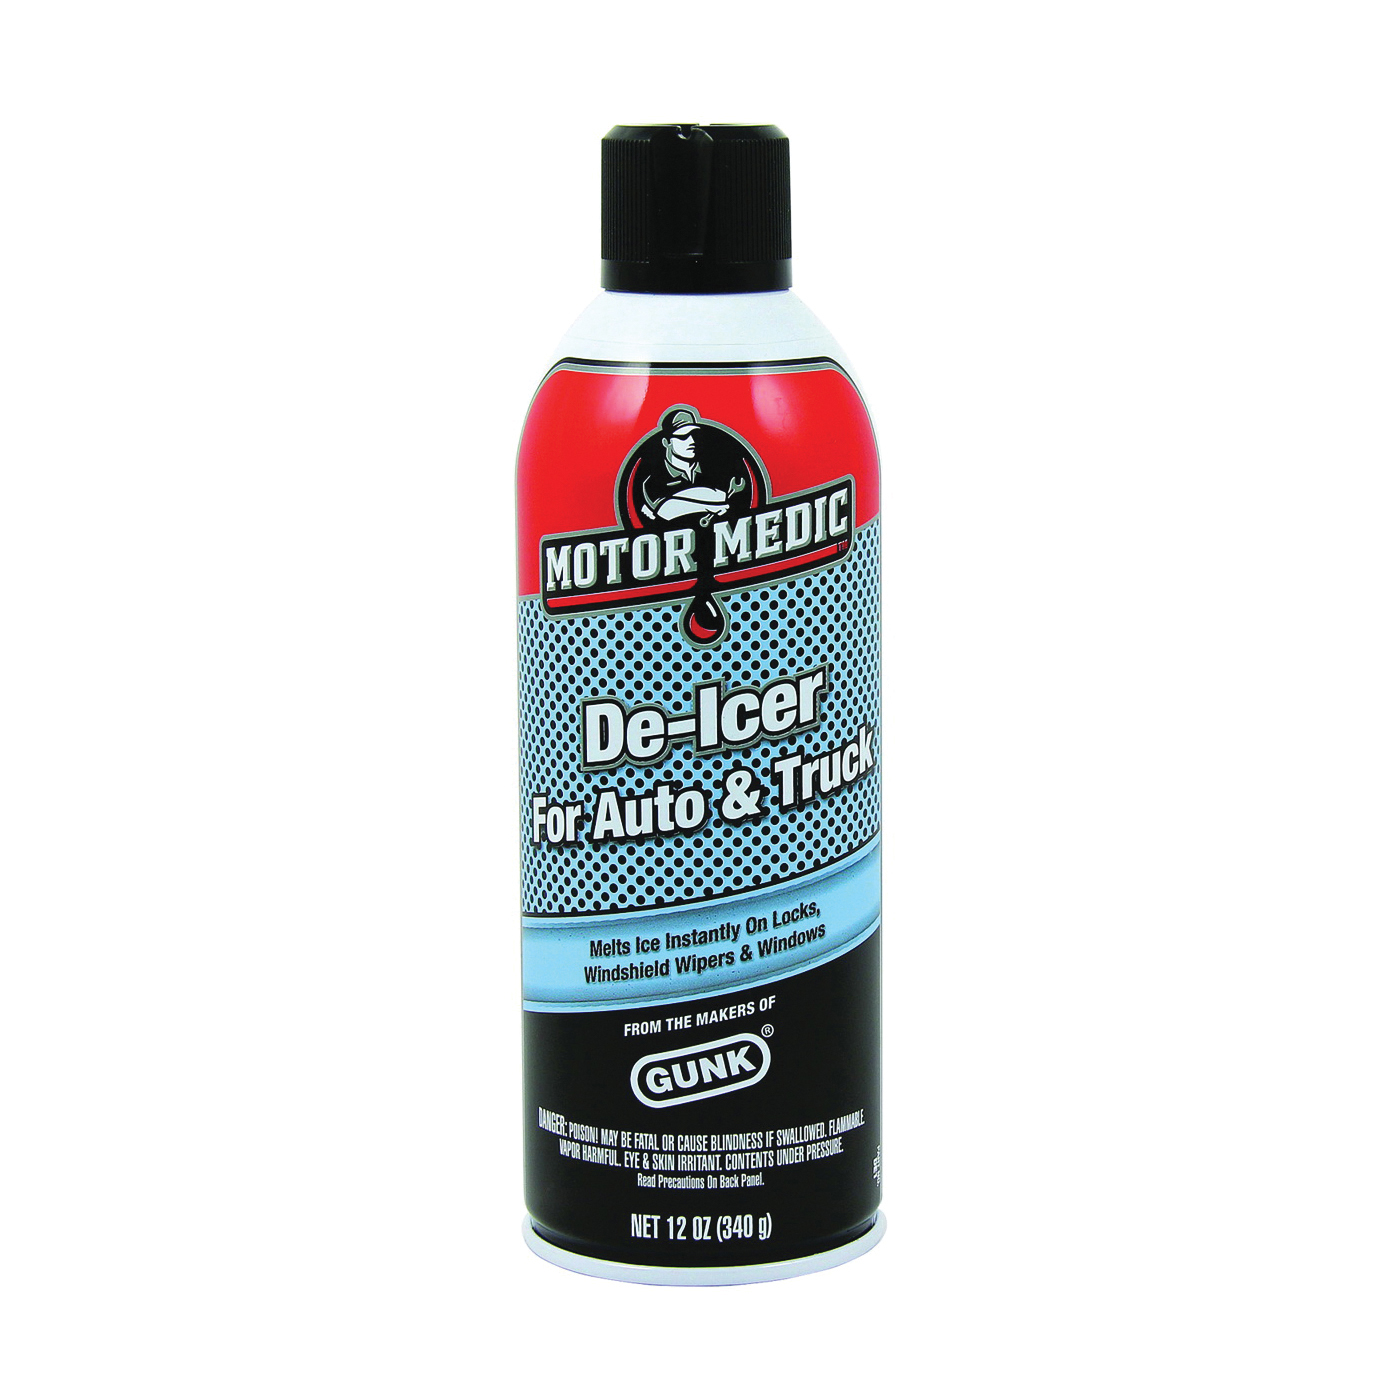 Prestone Windshield De-icer - 11 oz (AS242) - 3 Cans Included